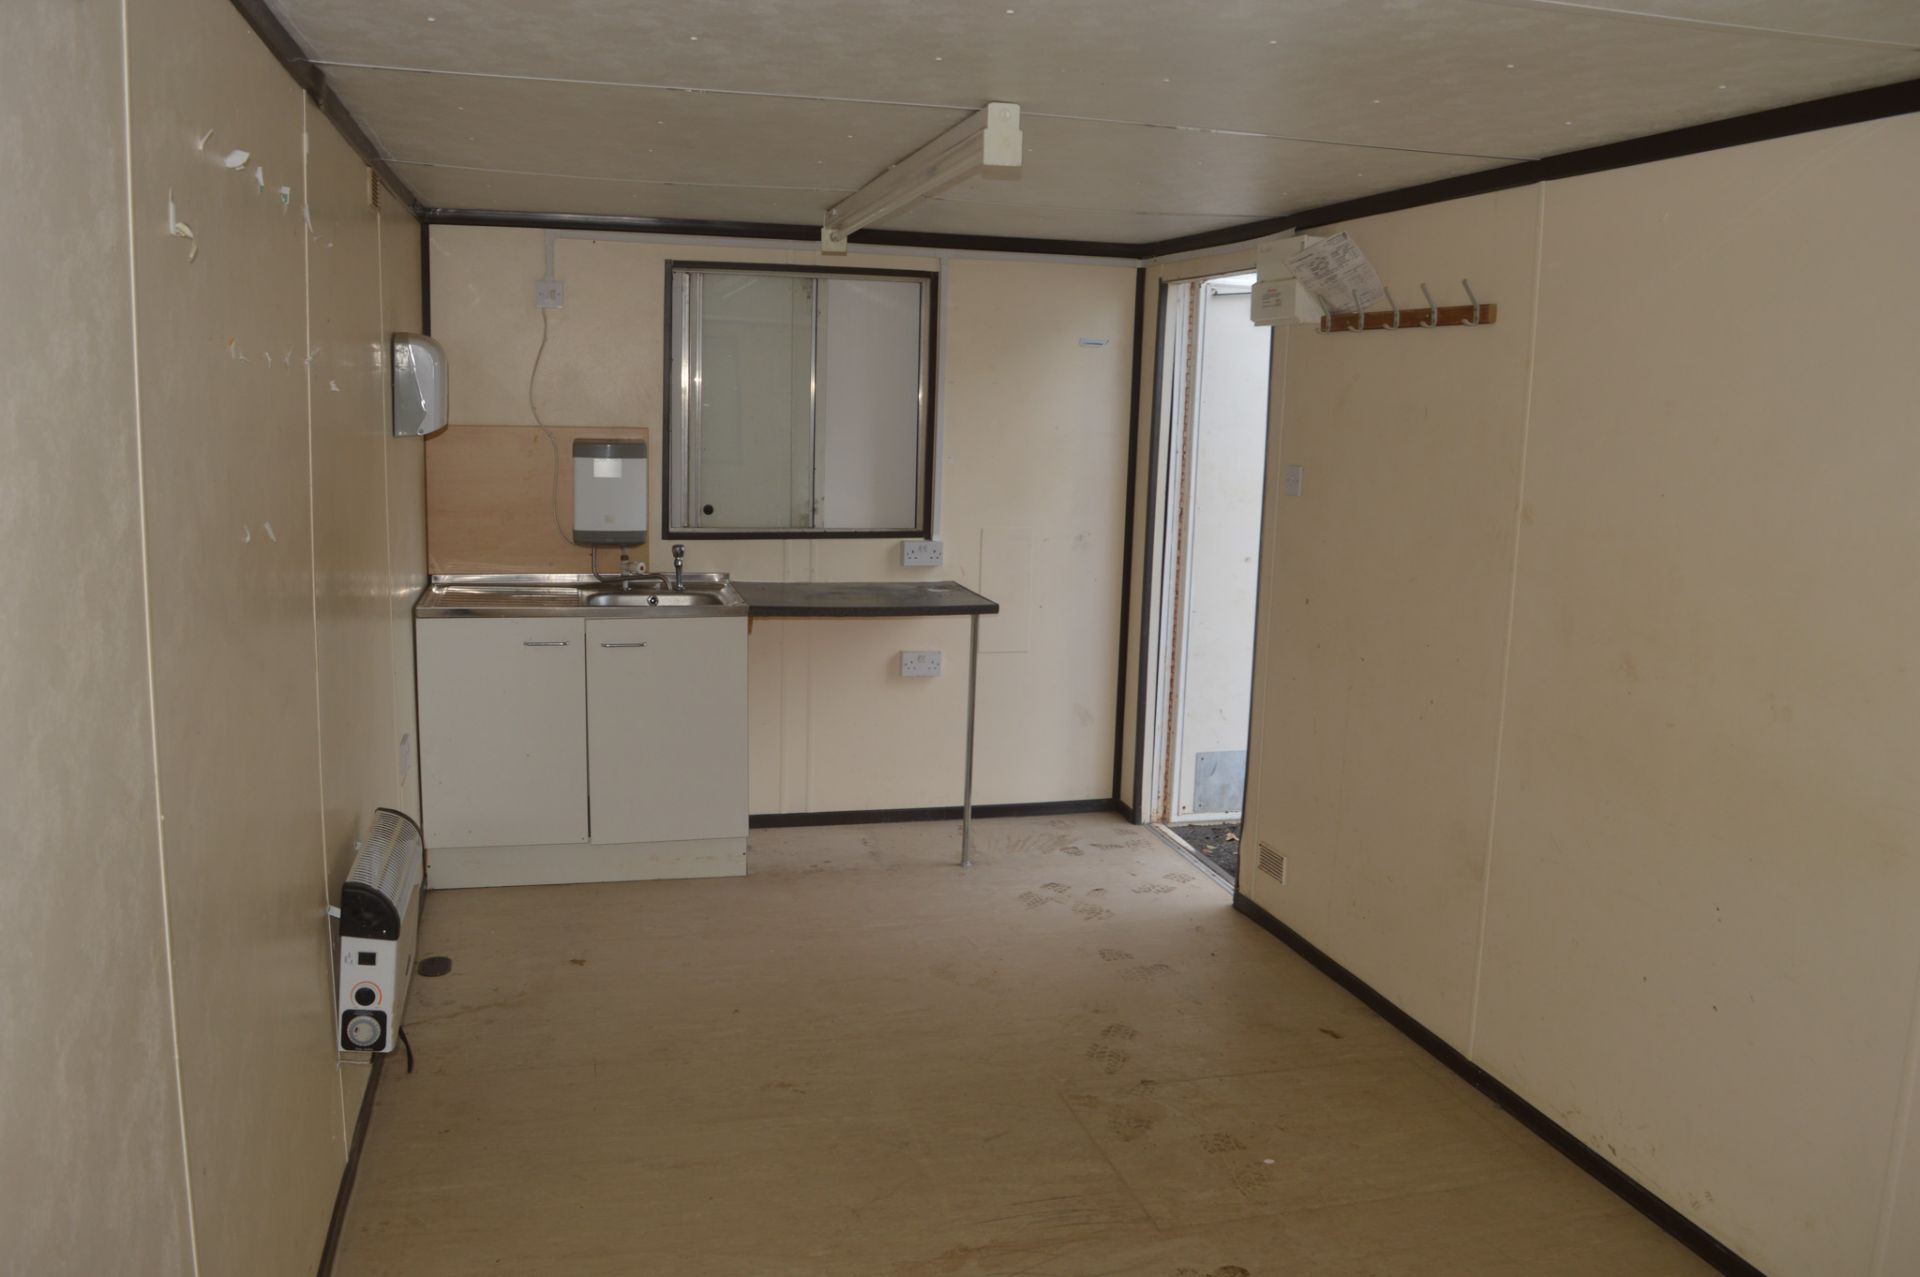 21 ft x 9 ft steel anti vandal site office unit  Comprising kitchen area c/w keys in office - Image 6 of 6